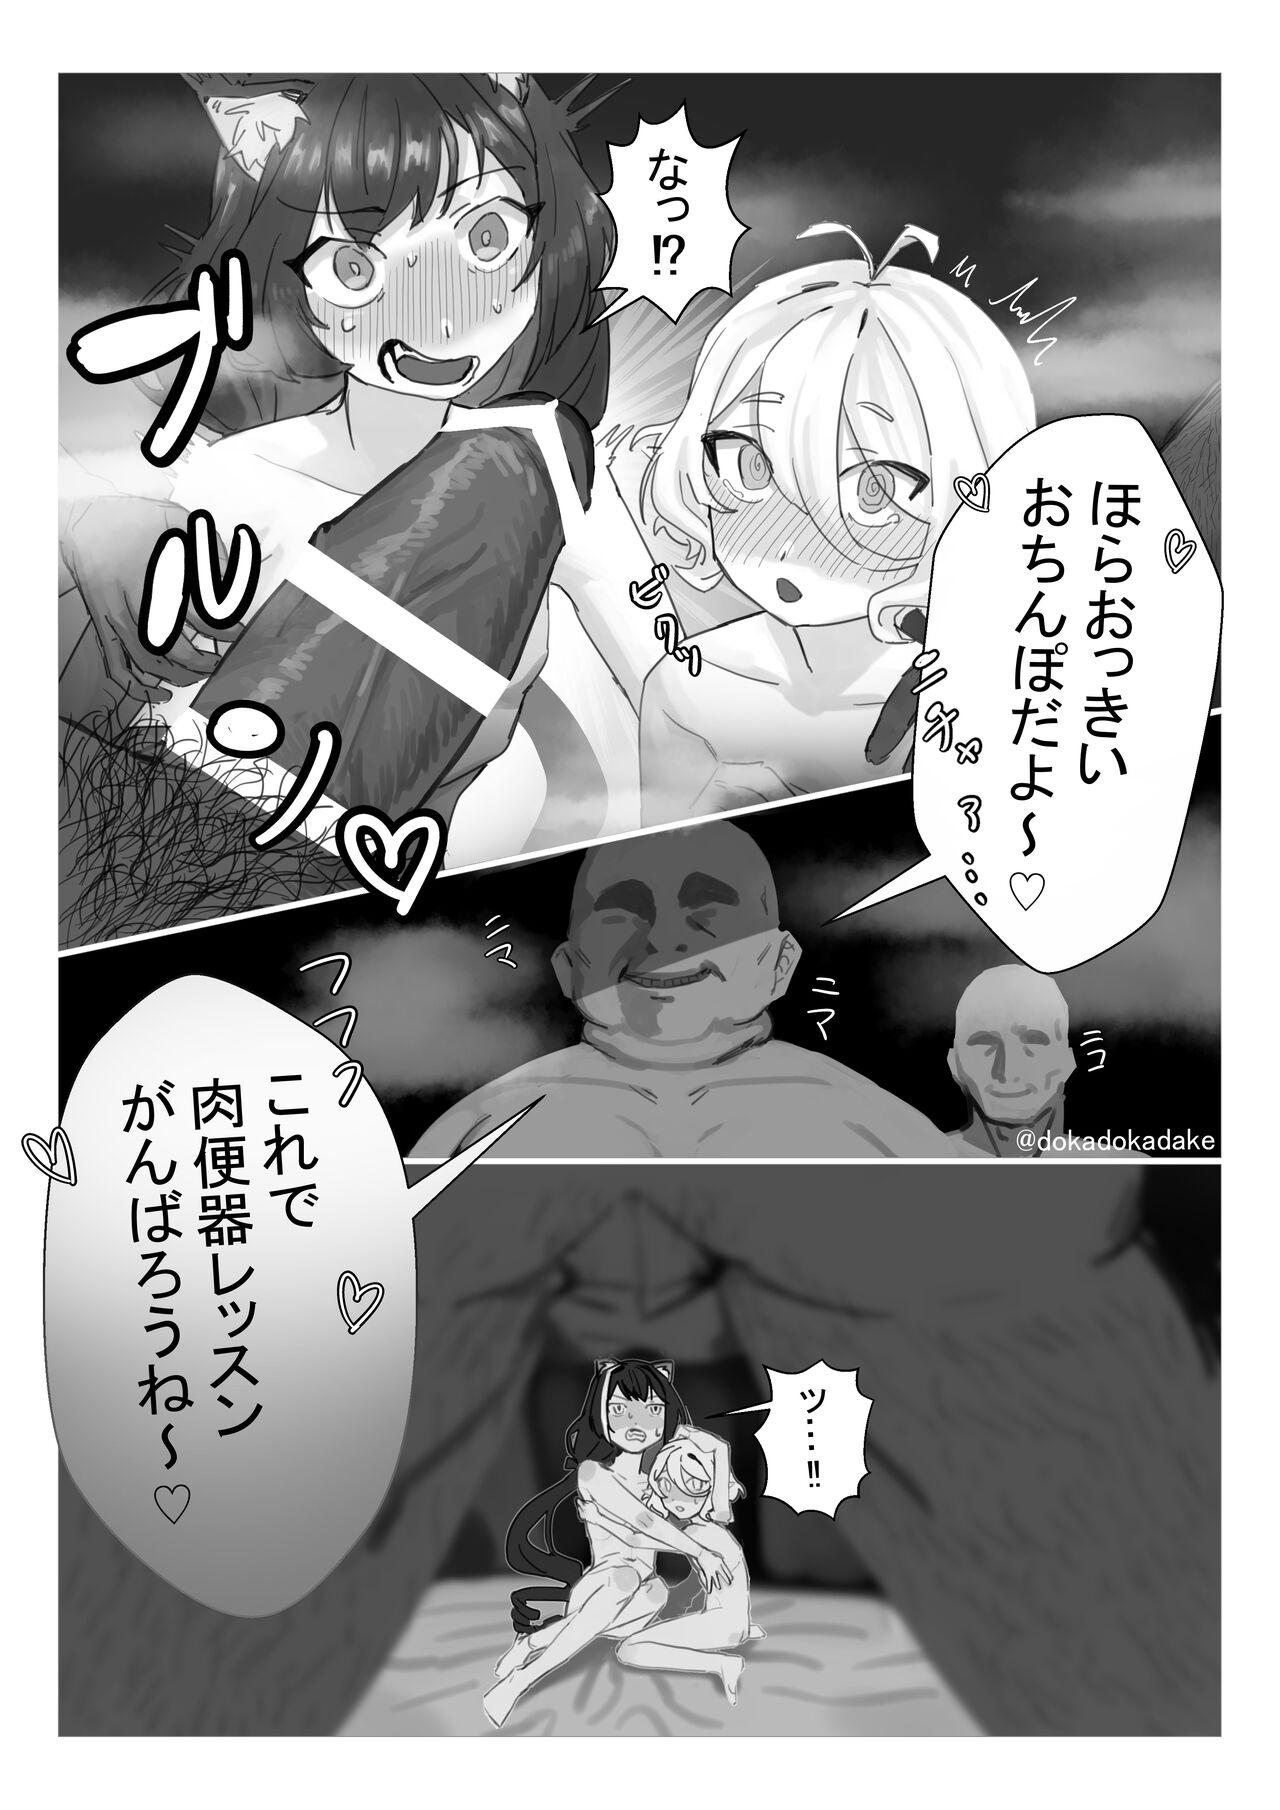 Newbie プリコネ輪姦NTR漫画 - Princess connect Pussy Play - Picture 3